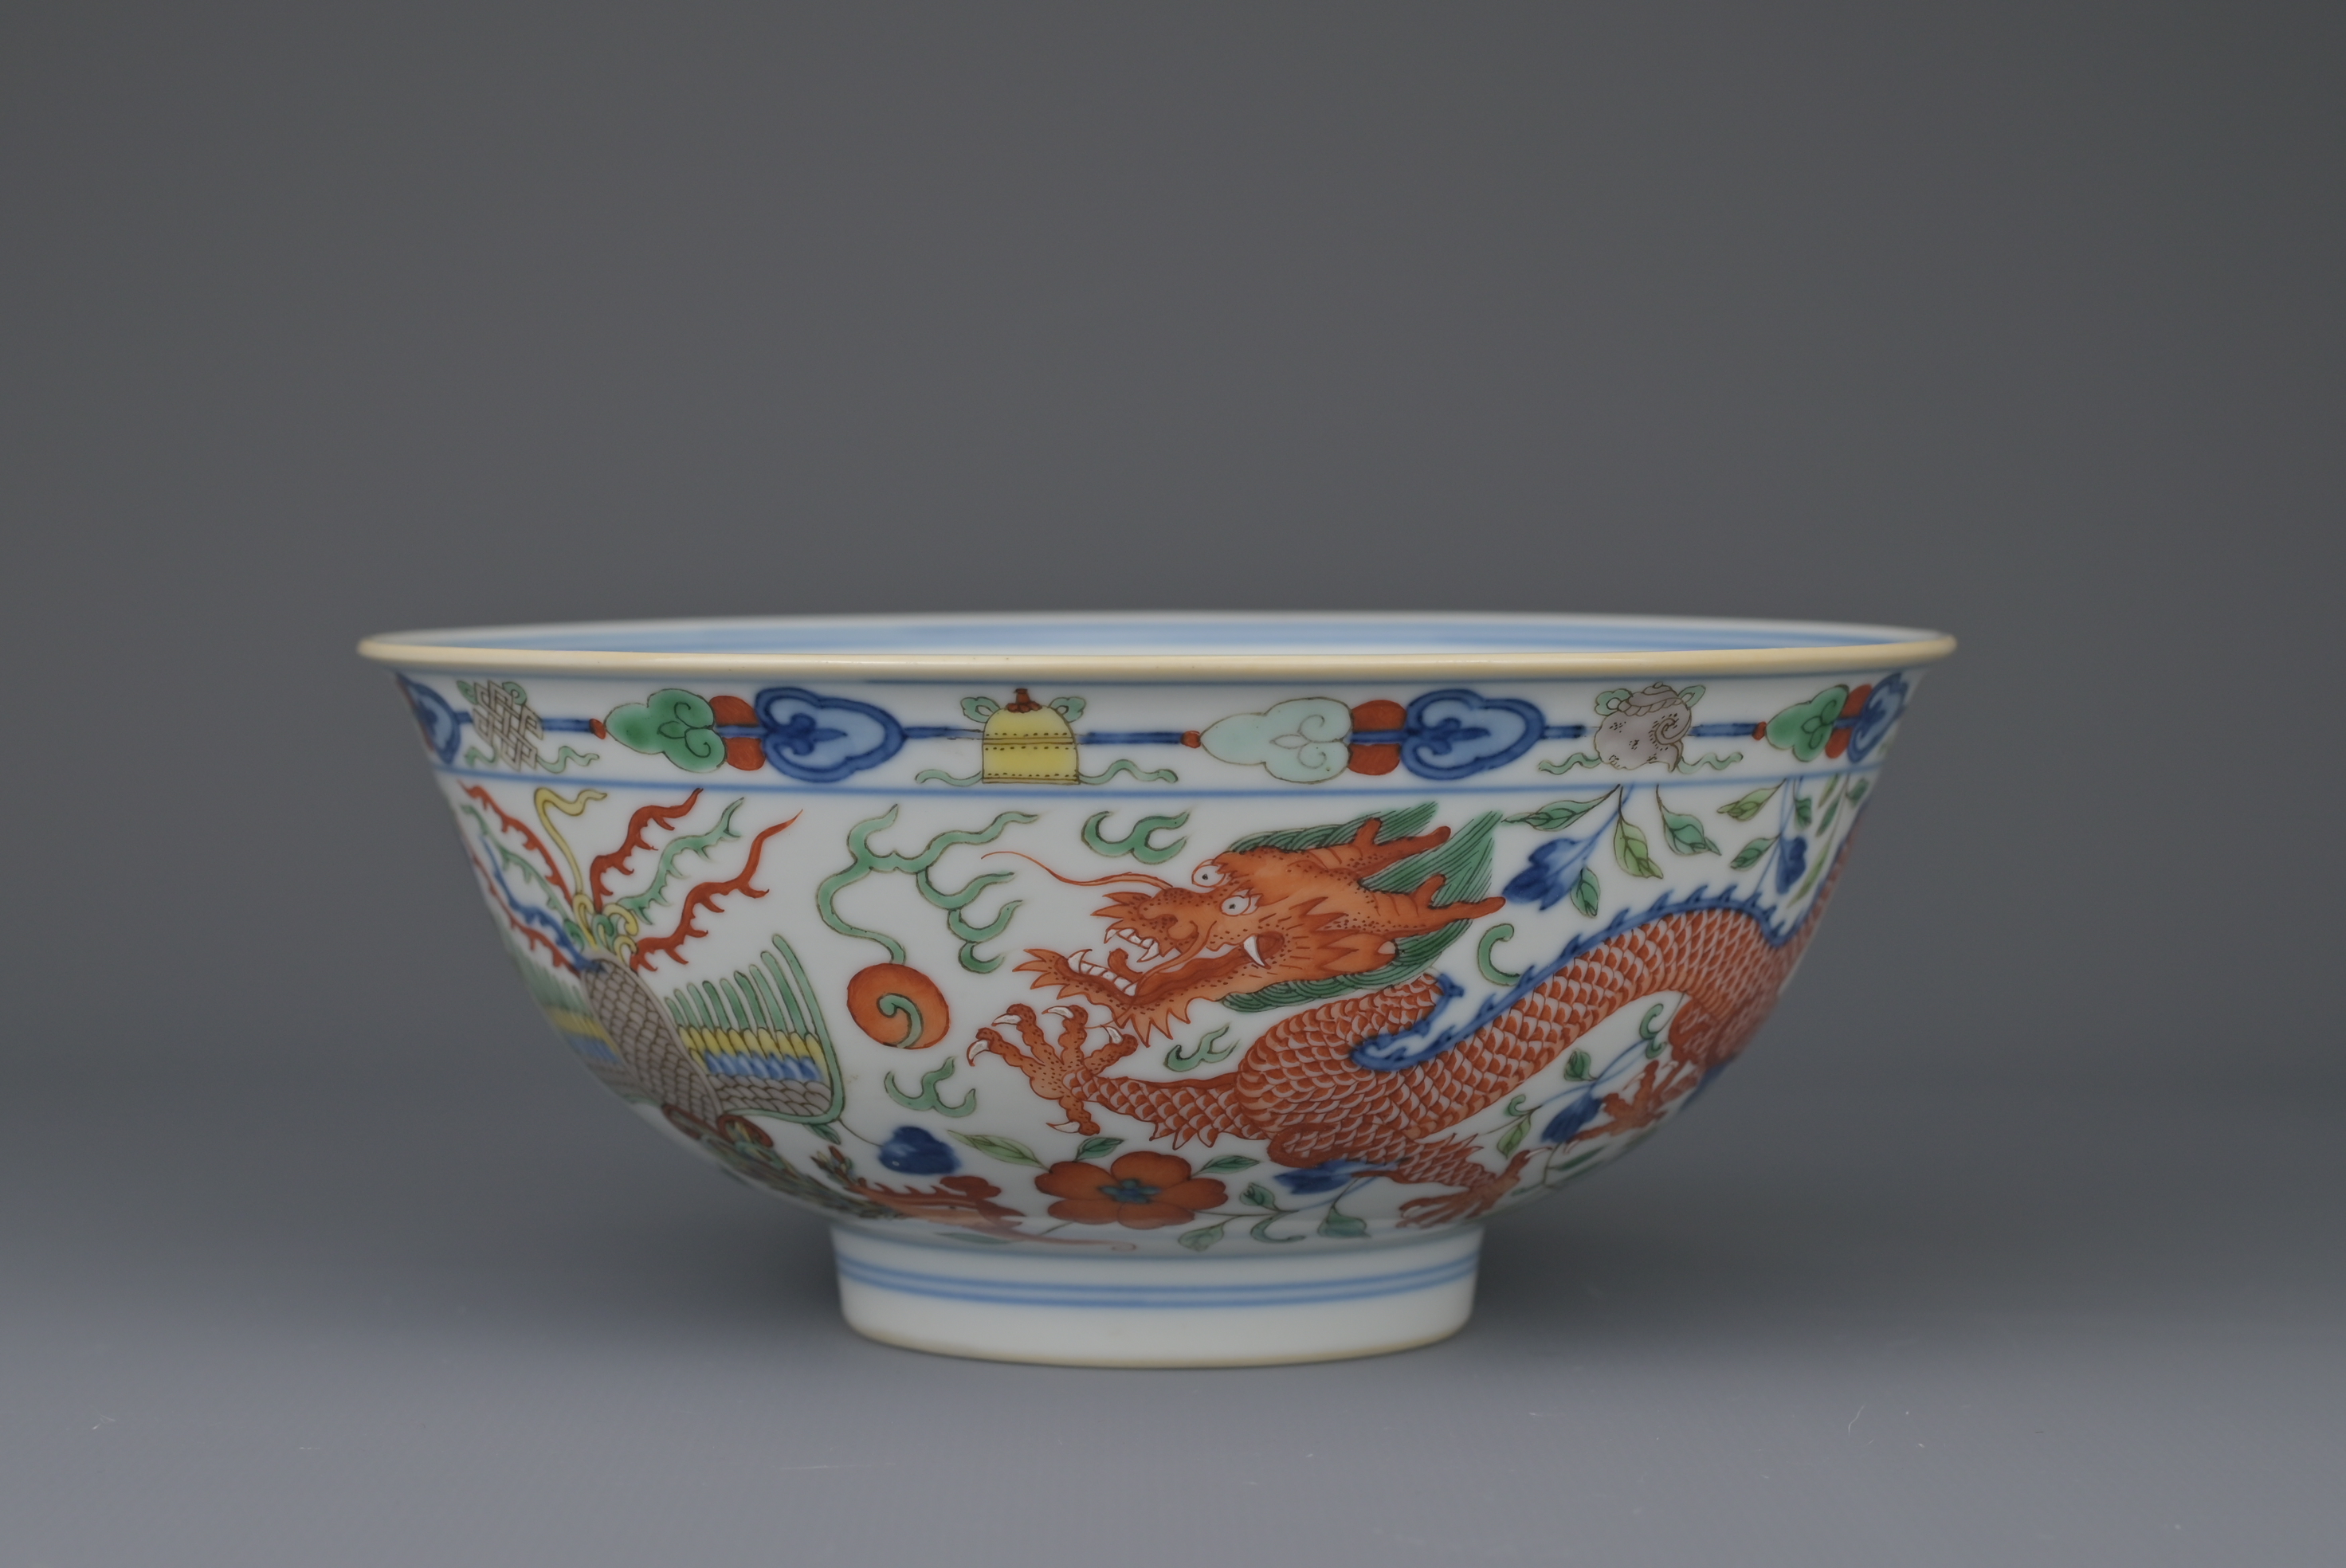 FINE CHINESE WUCAI ‘DRAGON & PHOENIX’ PORCELAIN BOWL, JIAQING MARK AND PERIOD, EARLY 19th CENTURY - Image 2 of 14